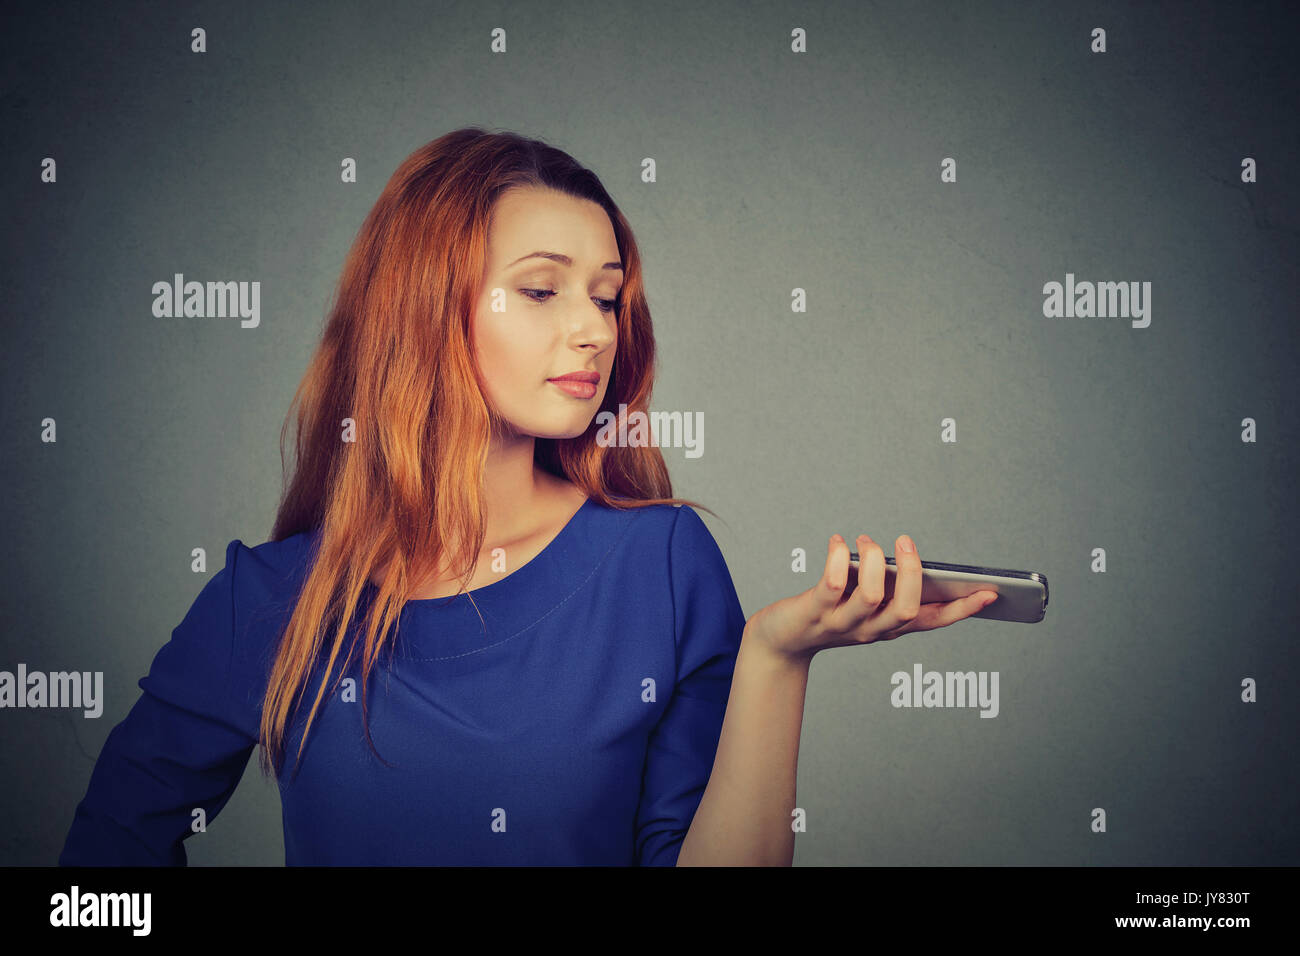 Frustrated annoyed upset woman with mobile phone standing by gray wall background Stock Photo